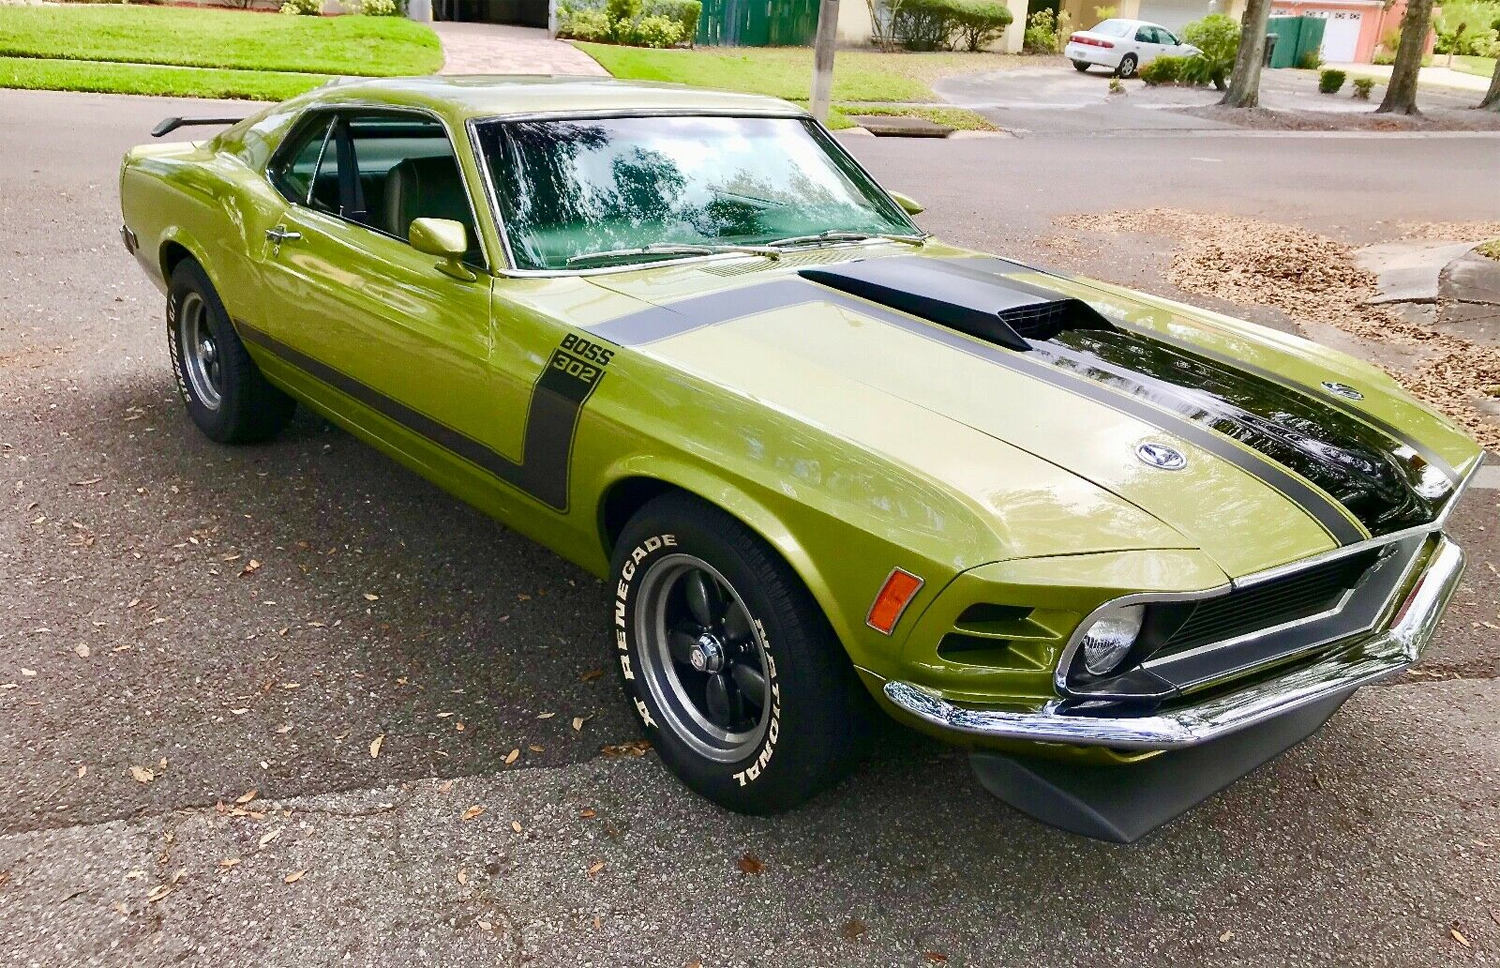 1970 Ford Boss 302 Tribute Car Has The Without The Cost